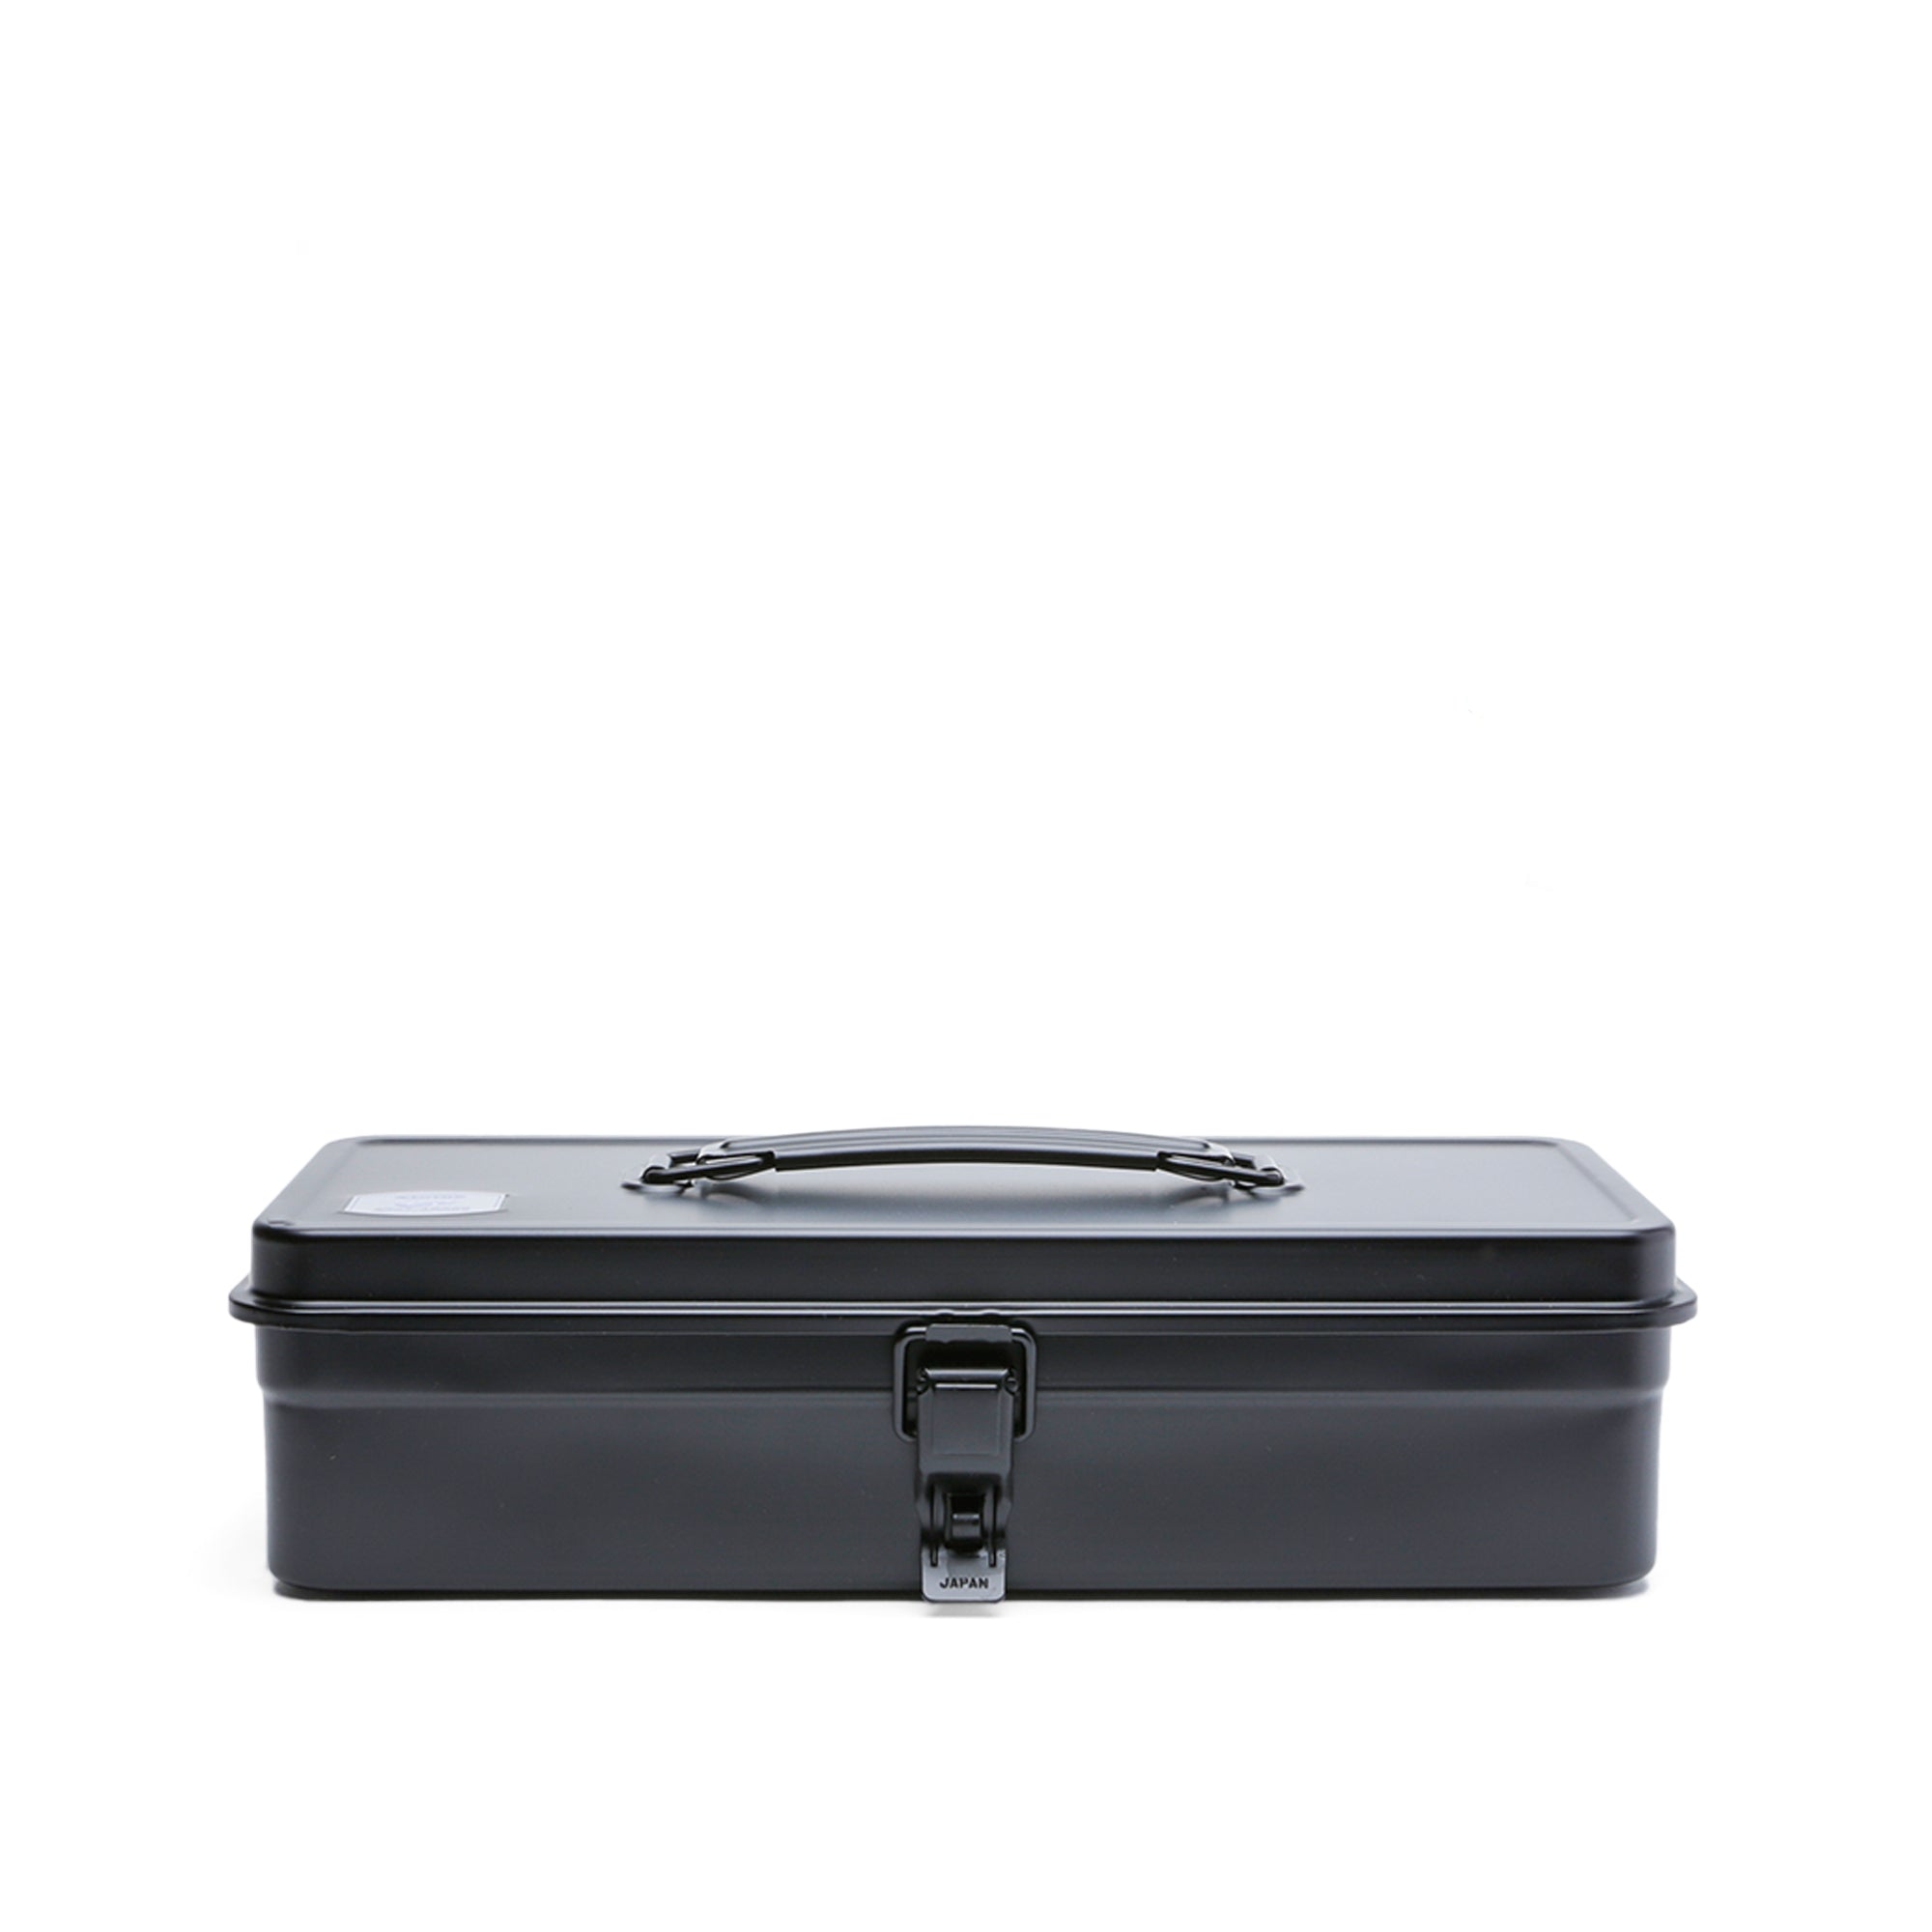 T-320 Steel Toolbox with Top Handle and Flat Lid